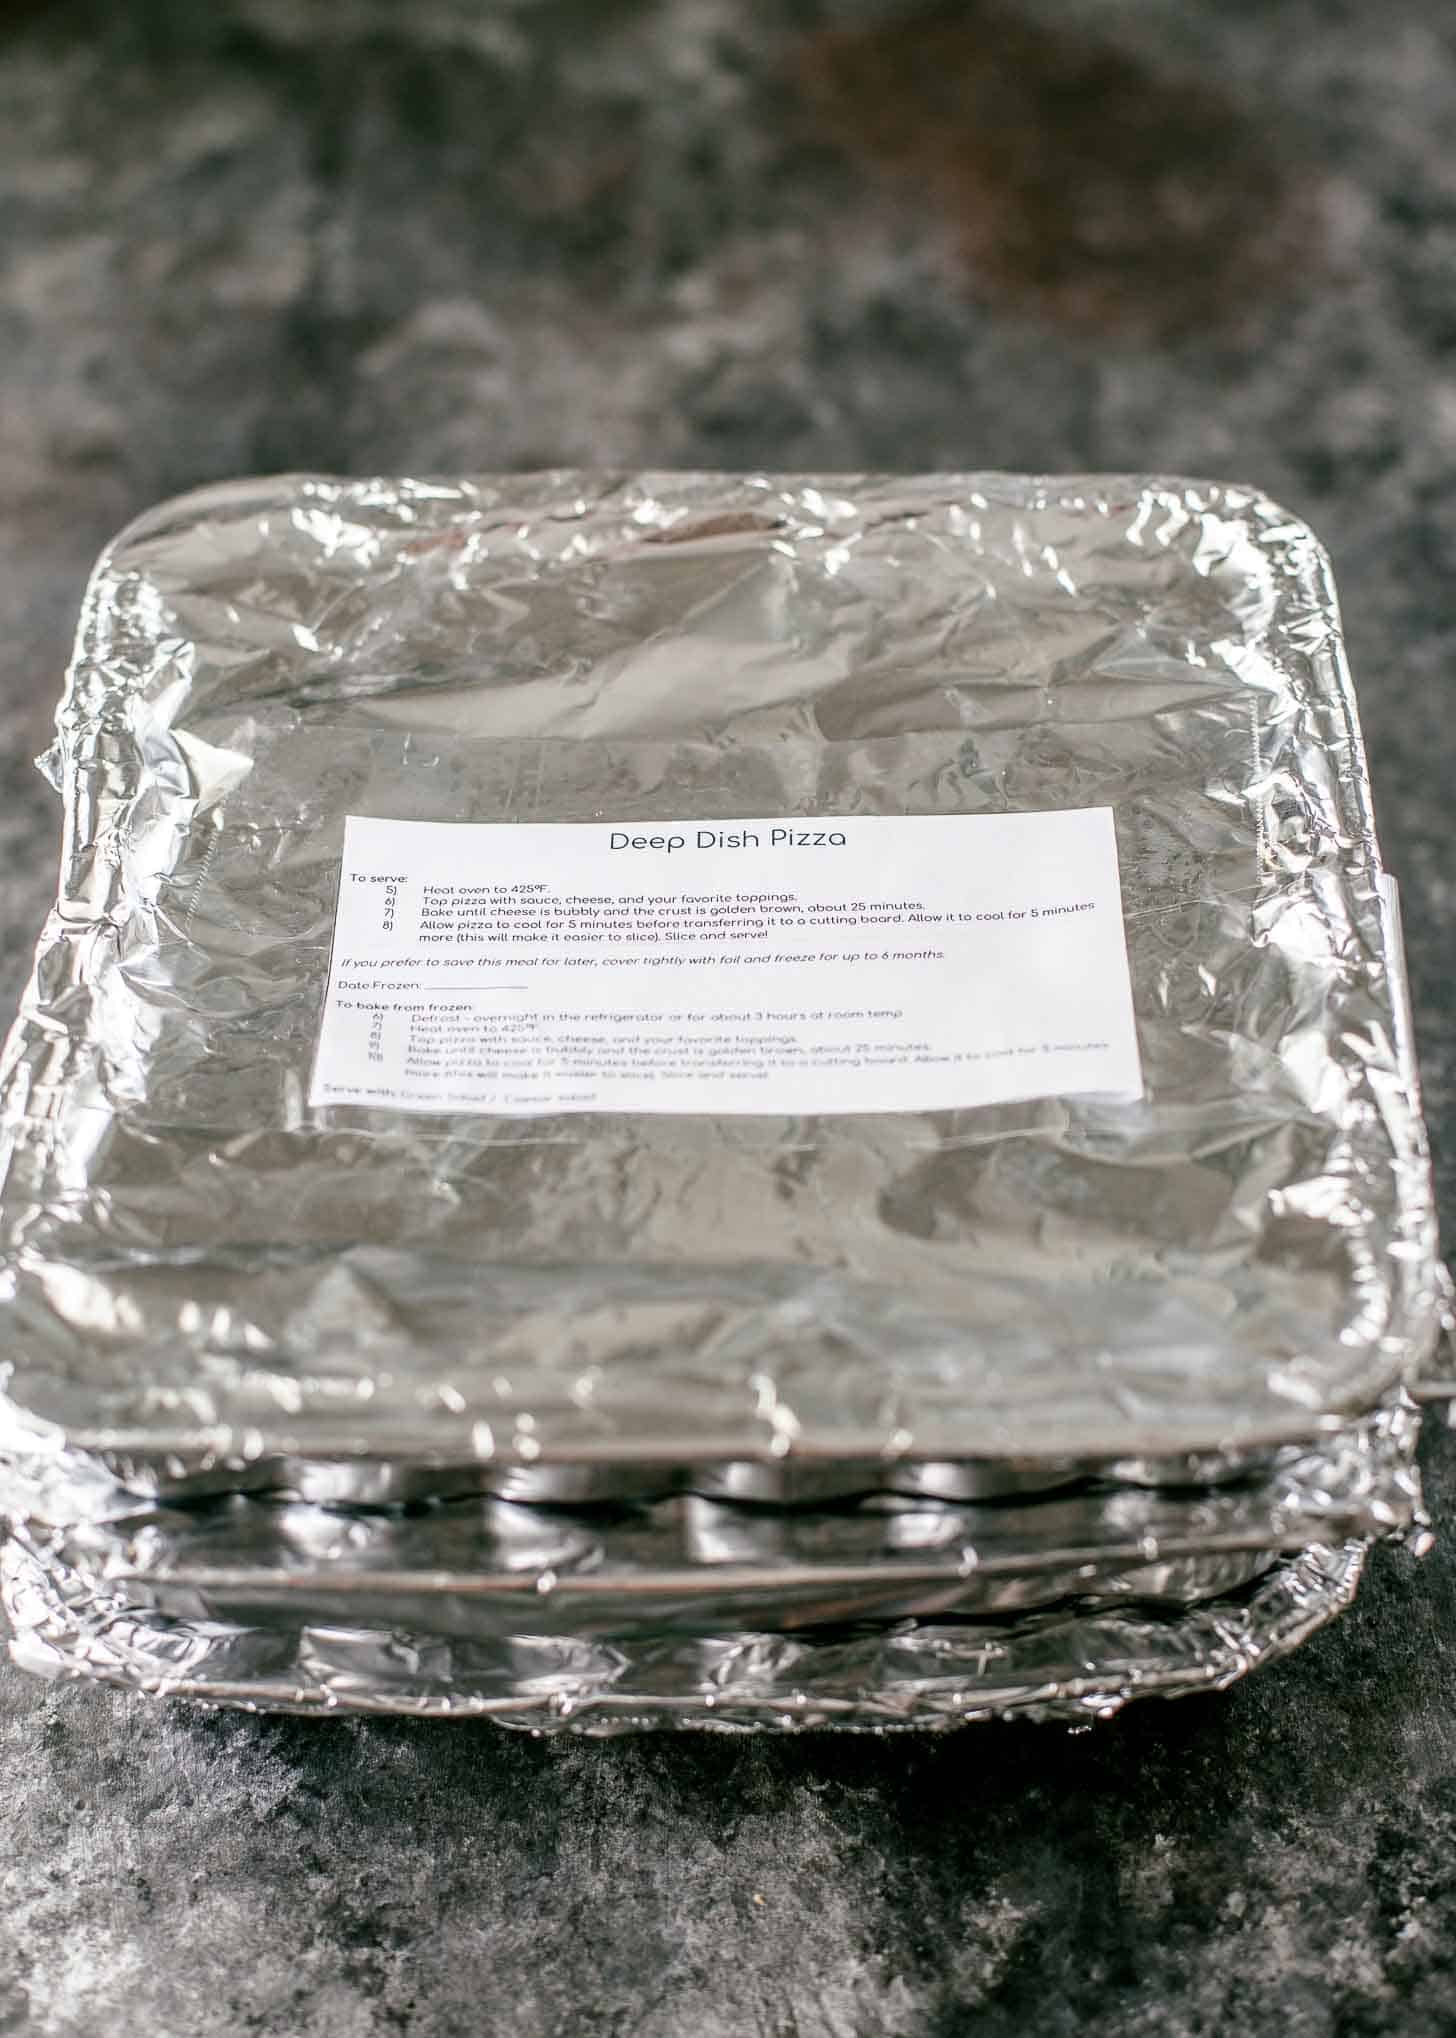 Deep Dish Pizza, wrapped in foil, with a freezer label